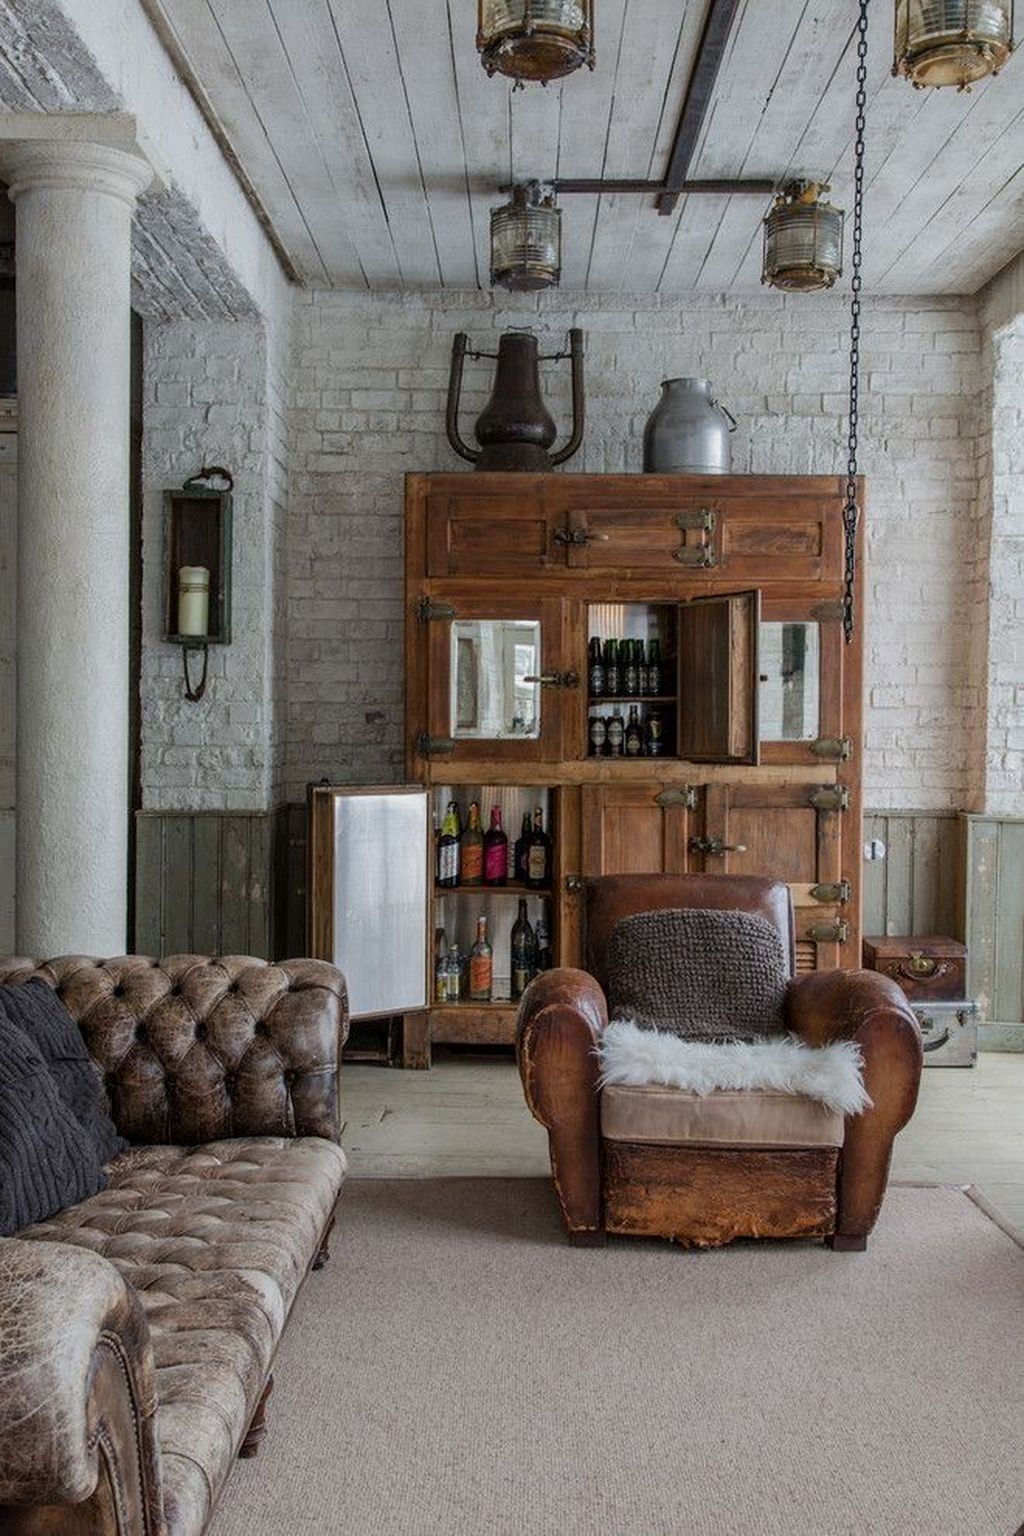 The Best Decorations Industrial Style Living Room That Will Amaze Your Guests22